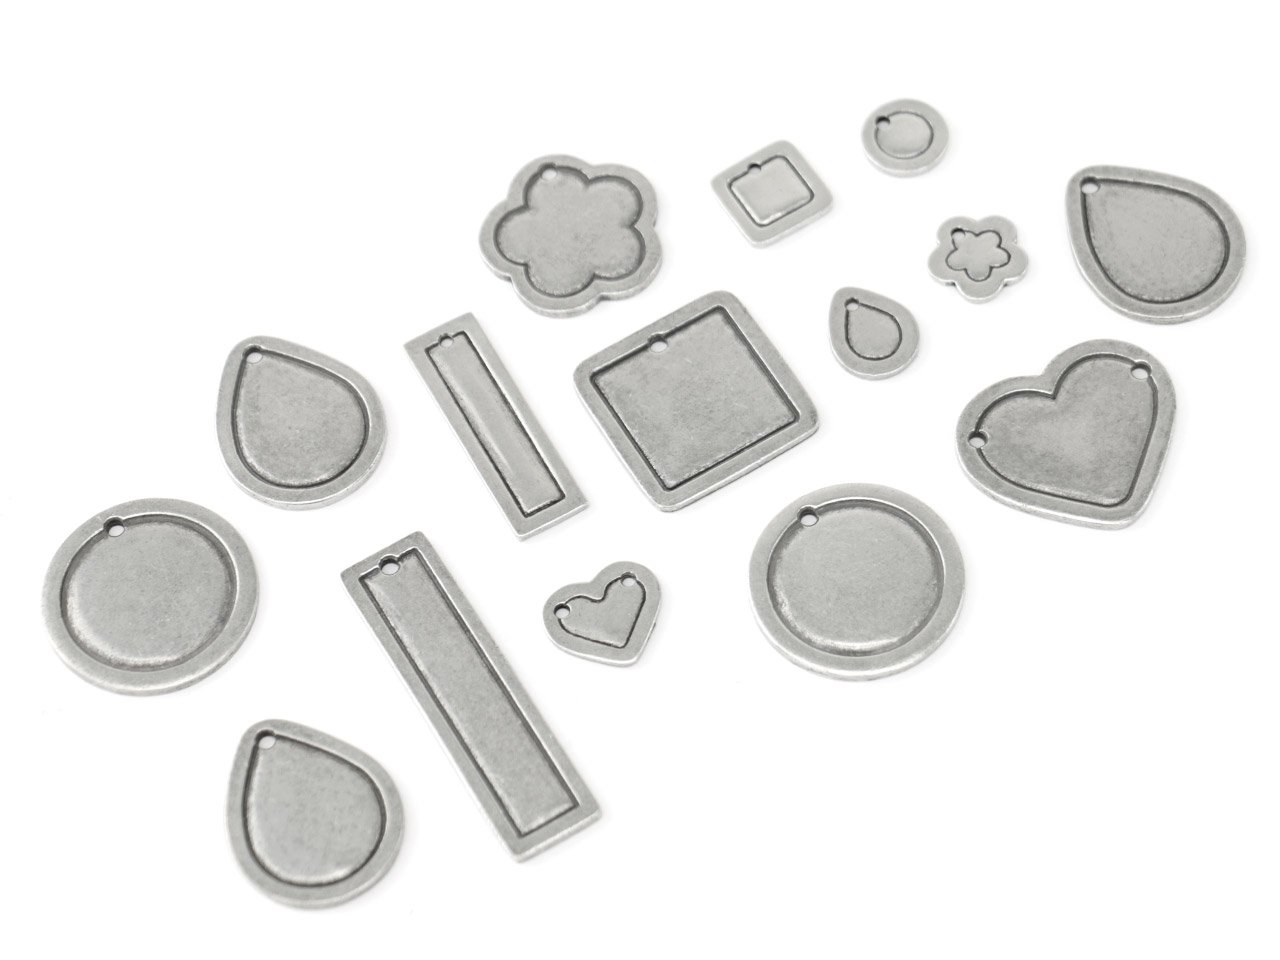 ImpressArt Small Heart Border Pewter Stamping Blank Clearance